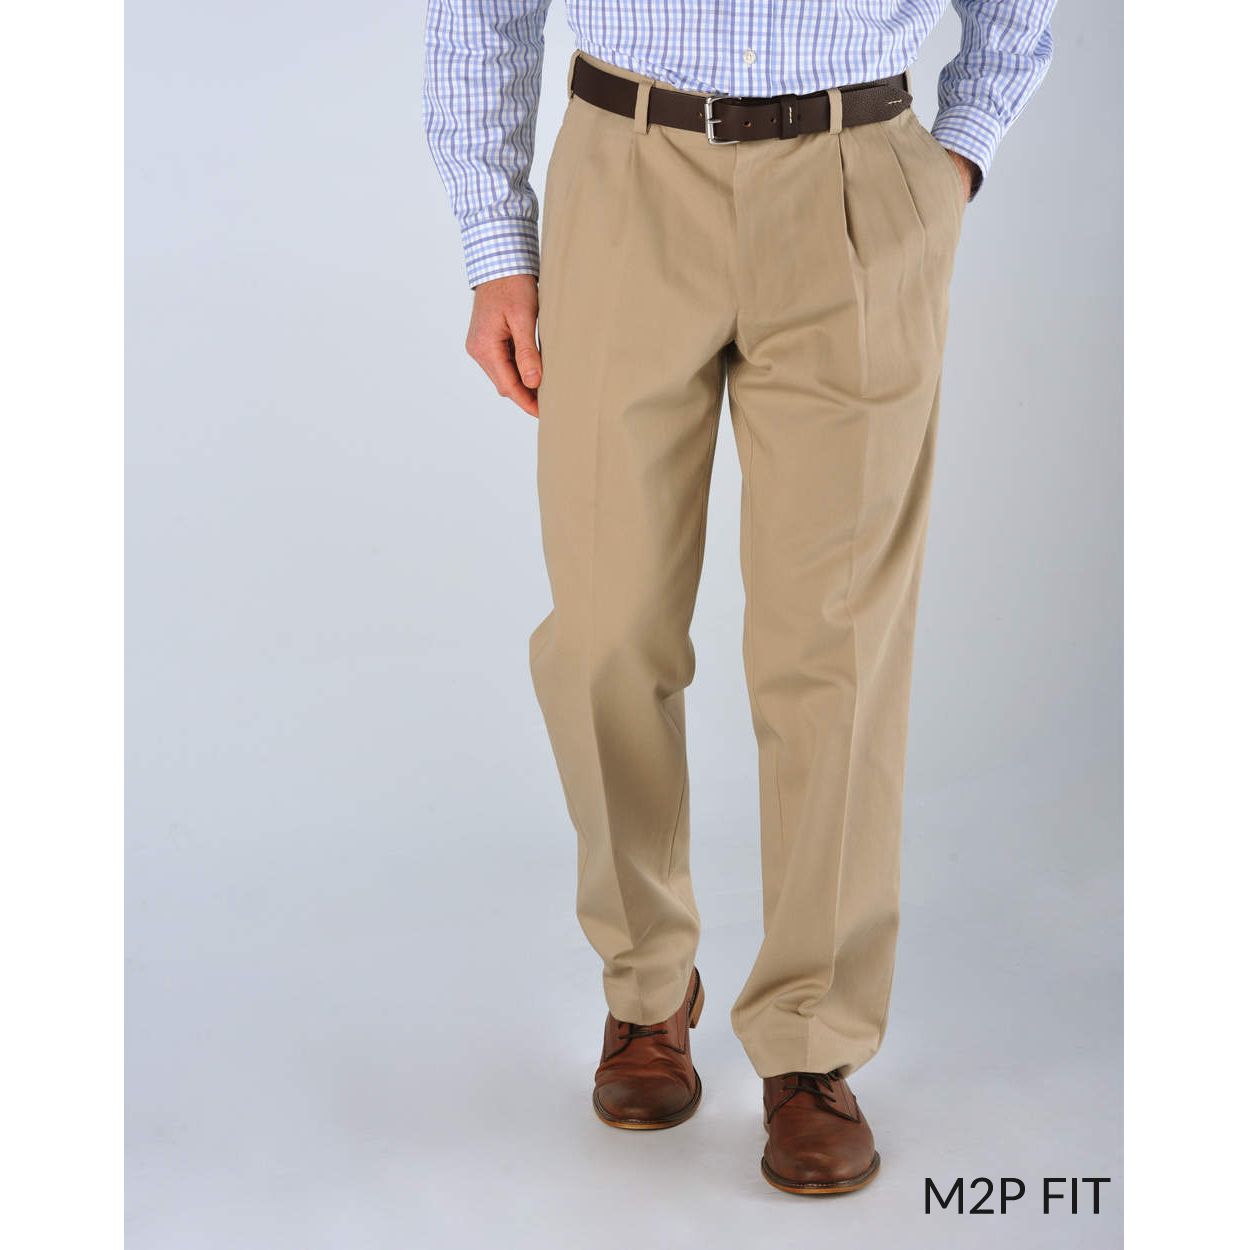 M2P Pleated Classic Fit Montgomery Stretch Twills in Navy by Bills Khakis